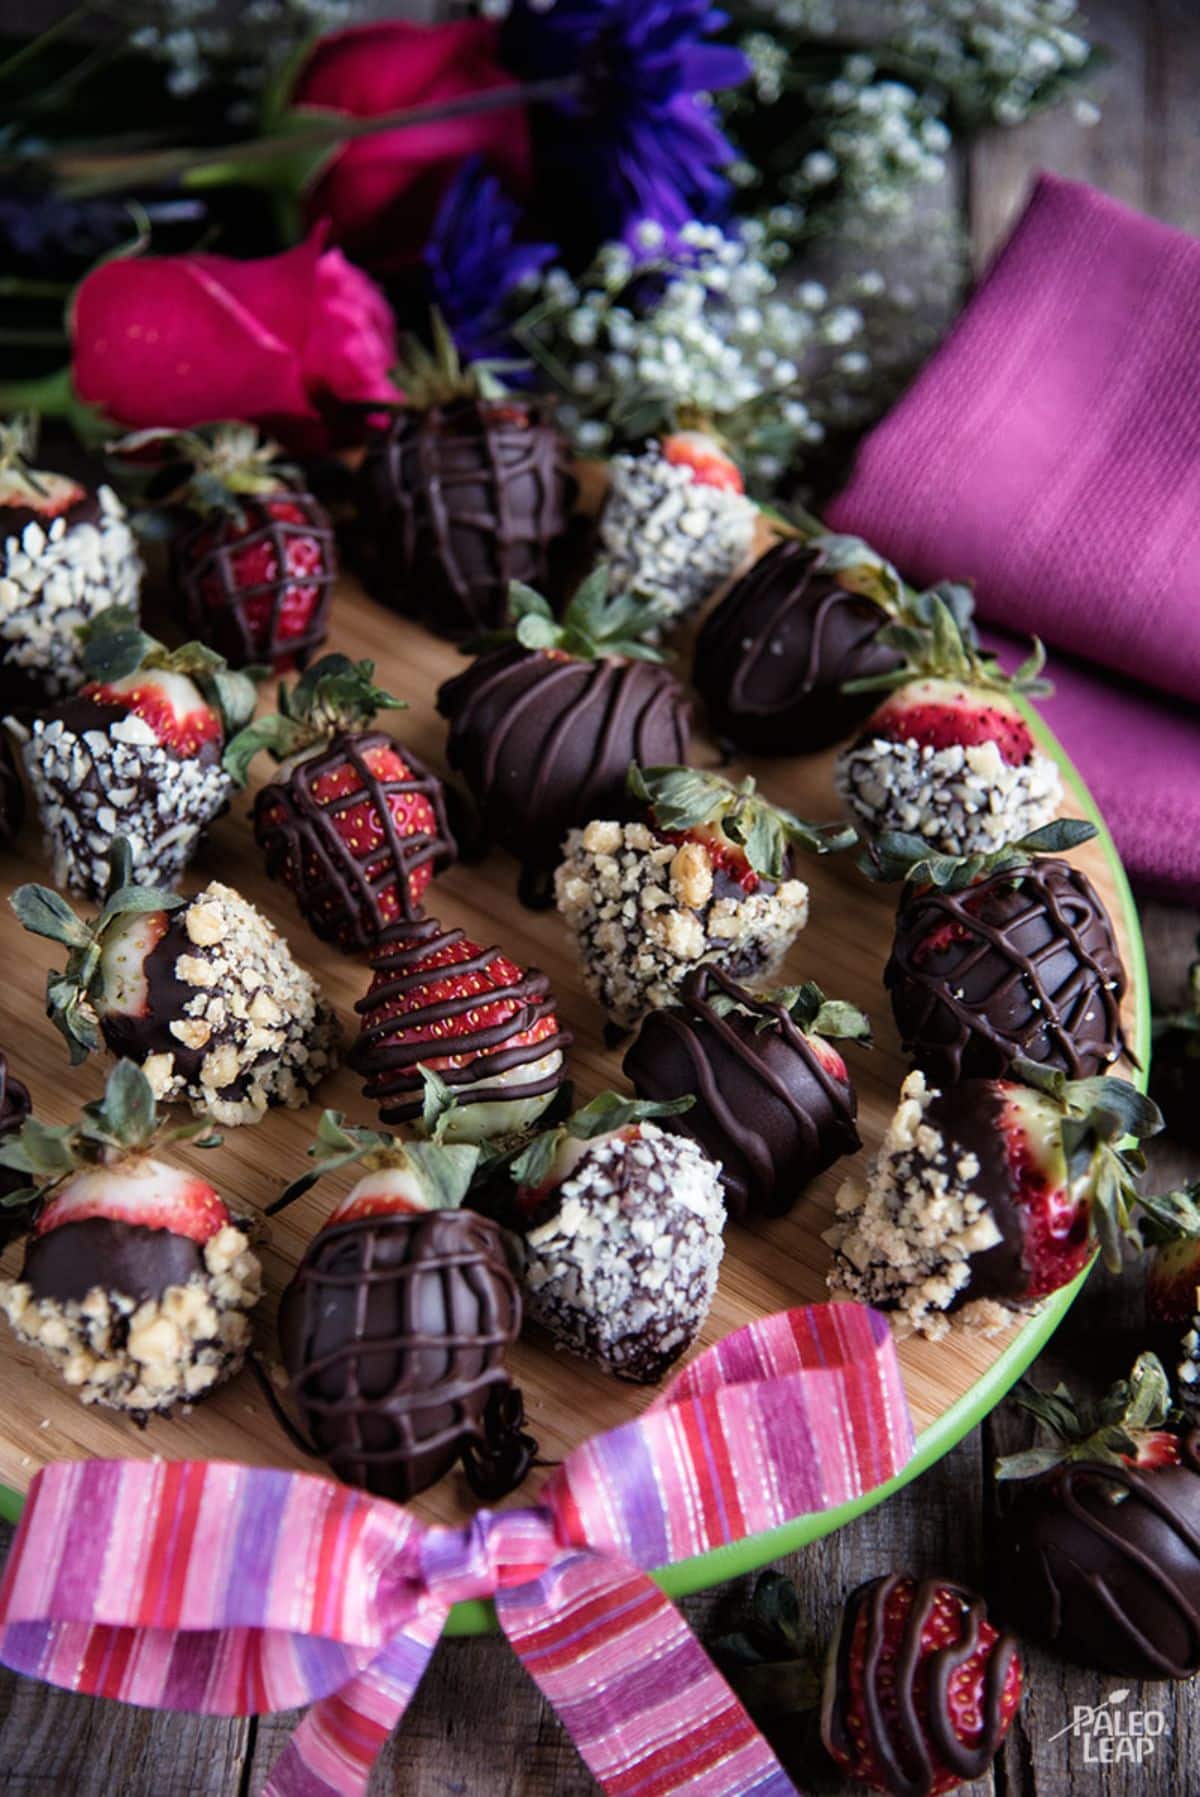 Chocolate-Covered Strawberries Dipped In Nuts